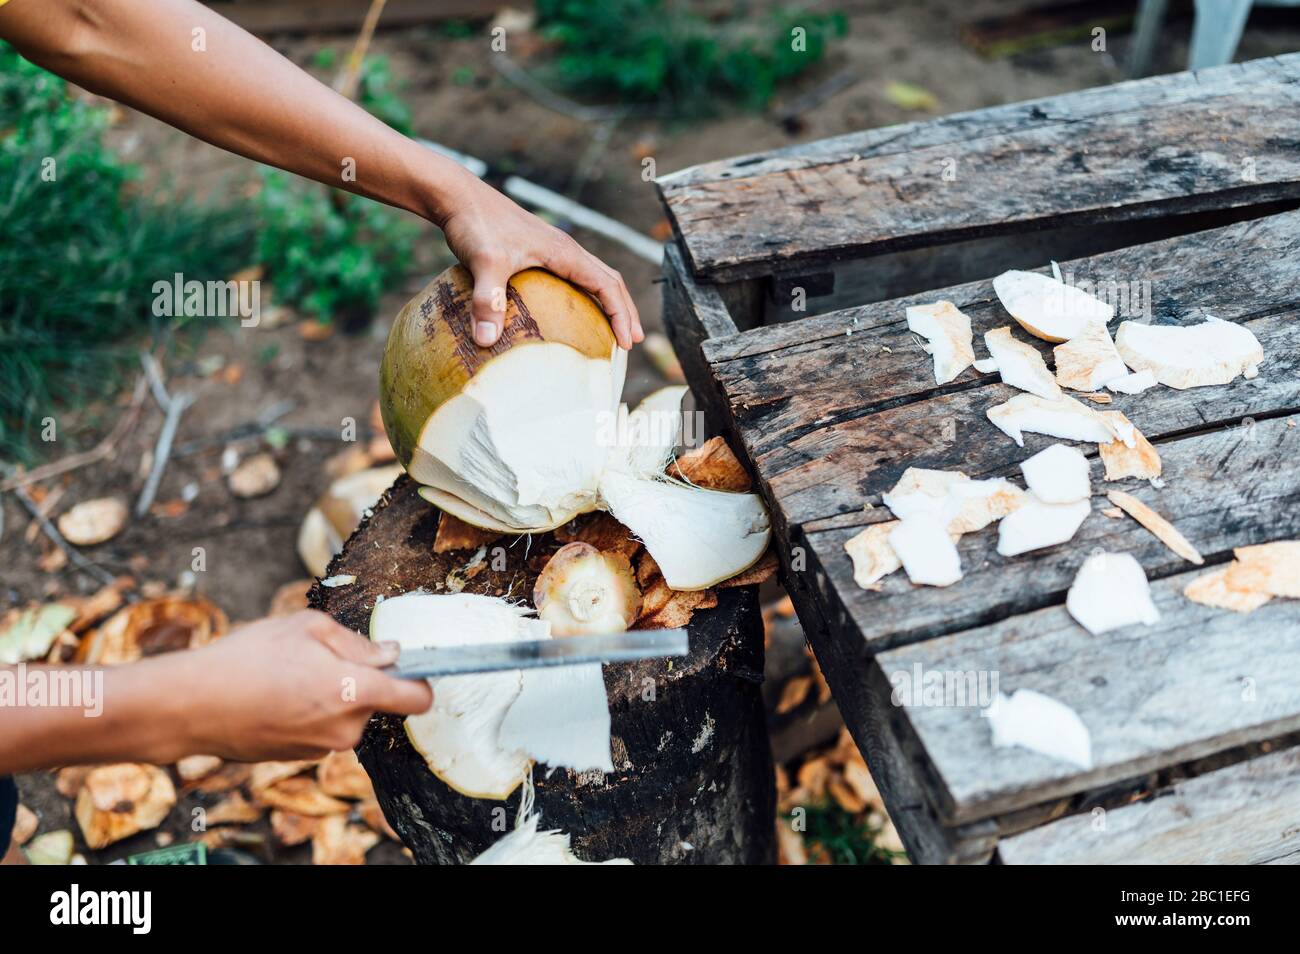 Crop view of young man opening coconut, Borneo Island, Malaysia Stock Photo